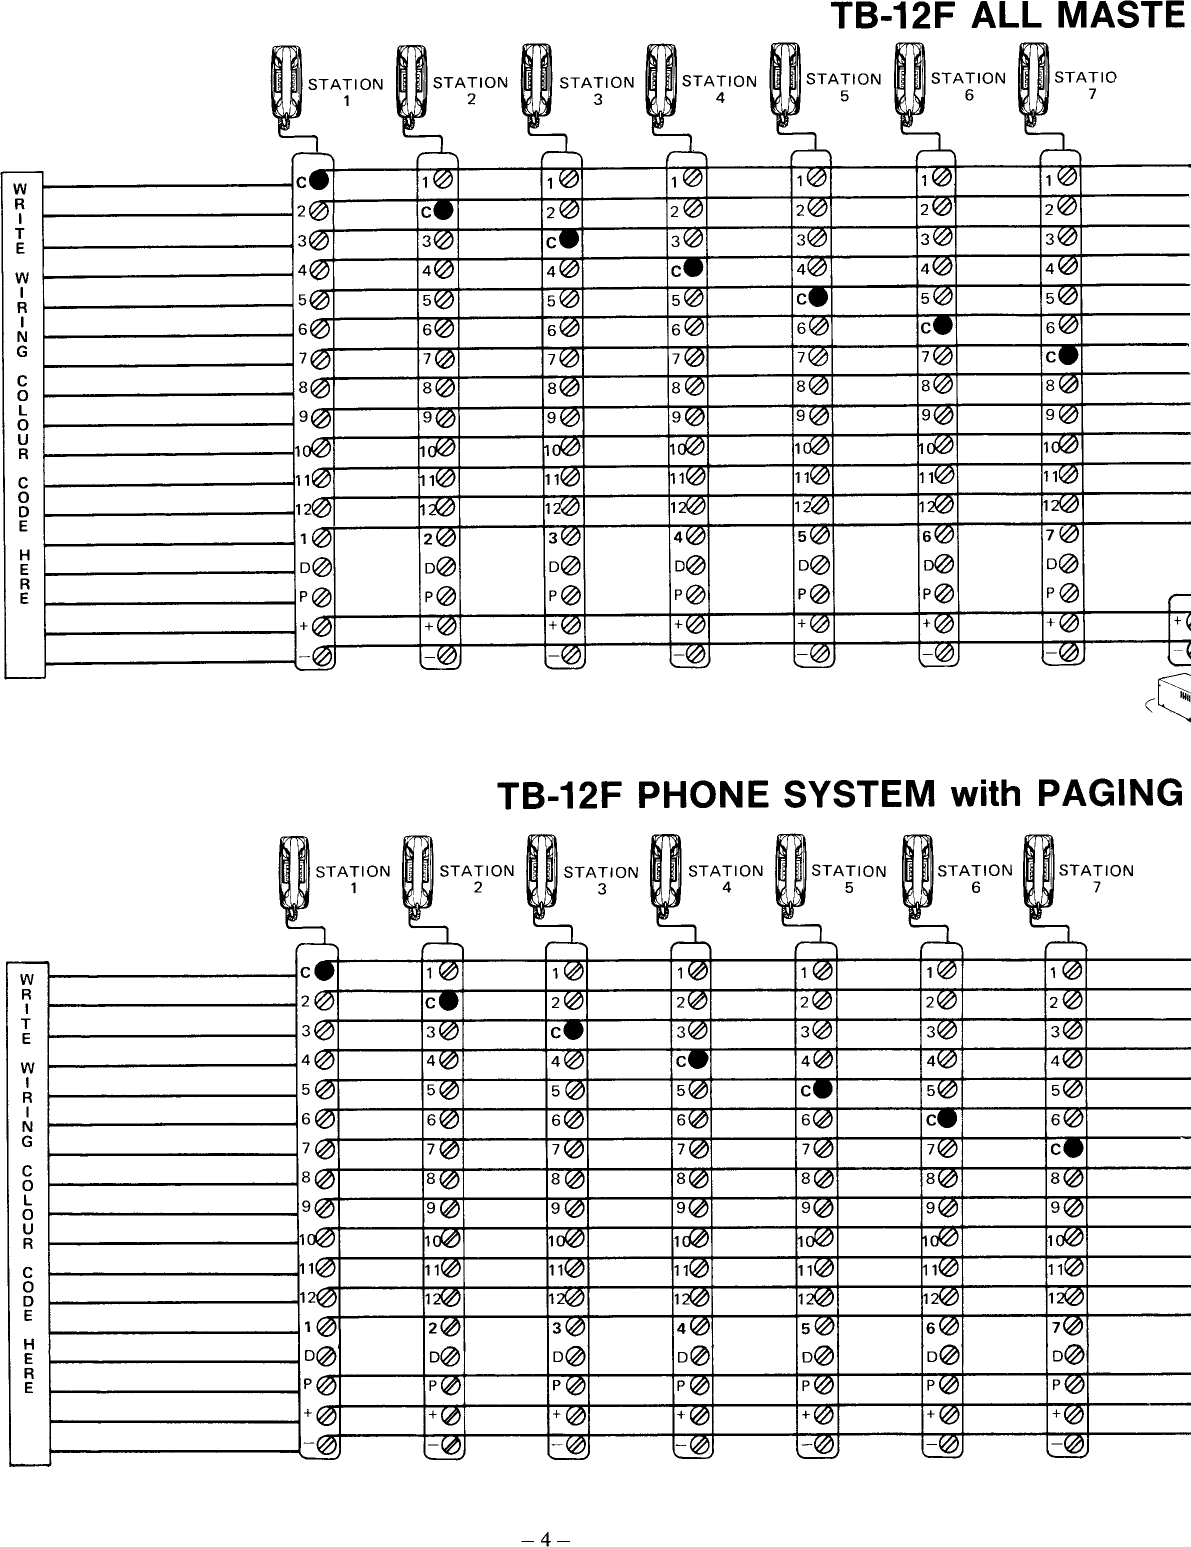 Page 4 of 8 - Aiphone Aiphone-Communica-Tb-12F-Users-Manual-  Aiphone-communica-tb-12f-users-manual